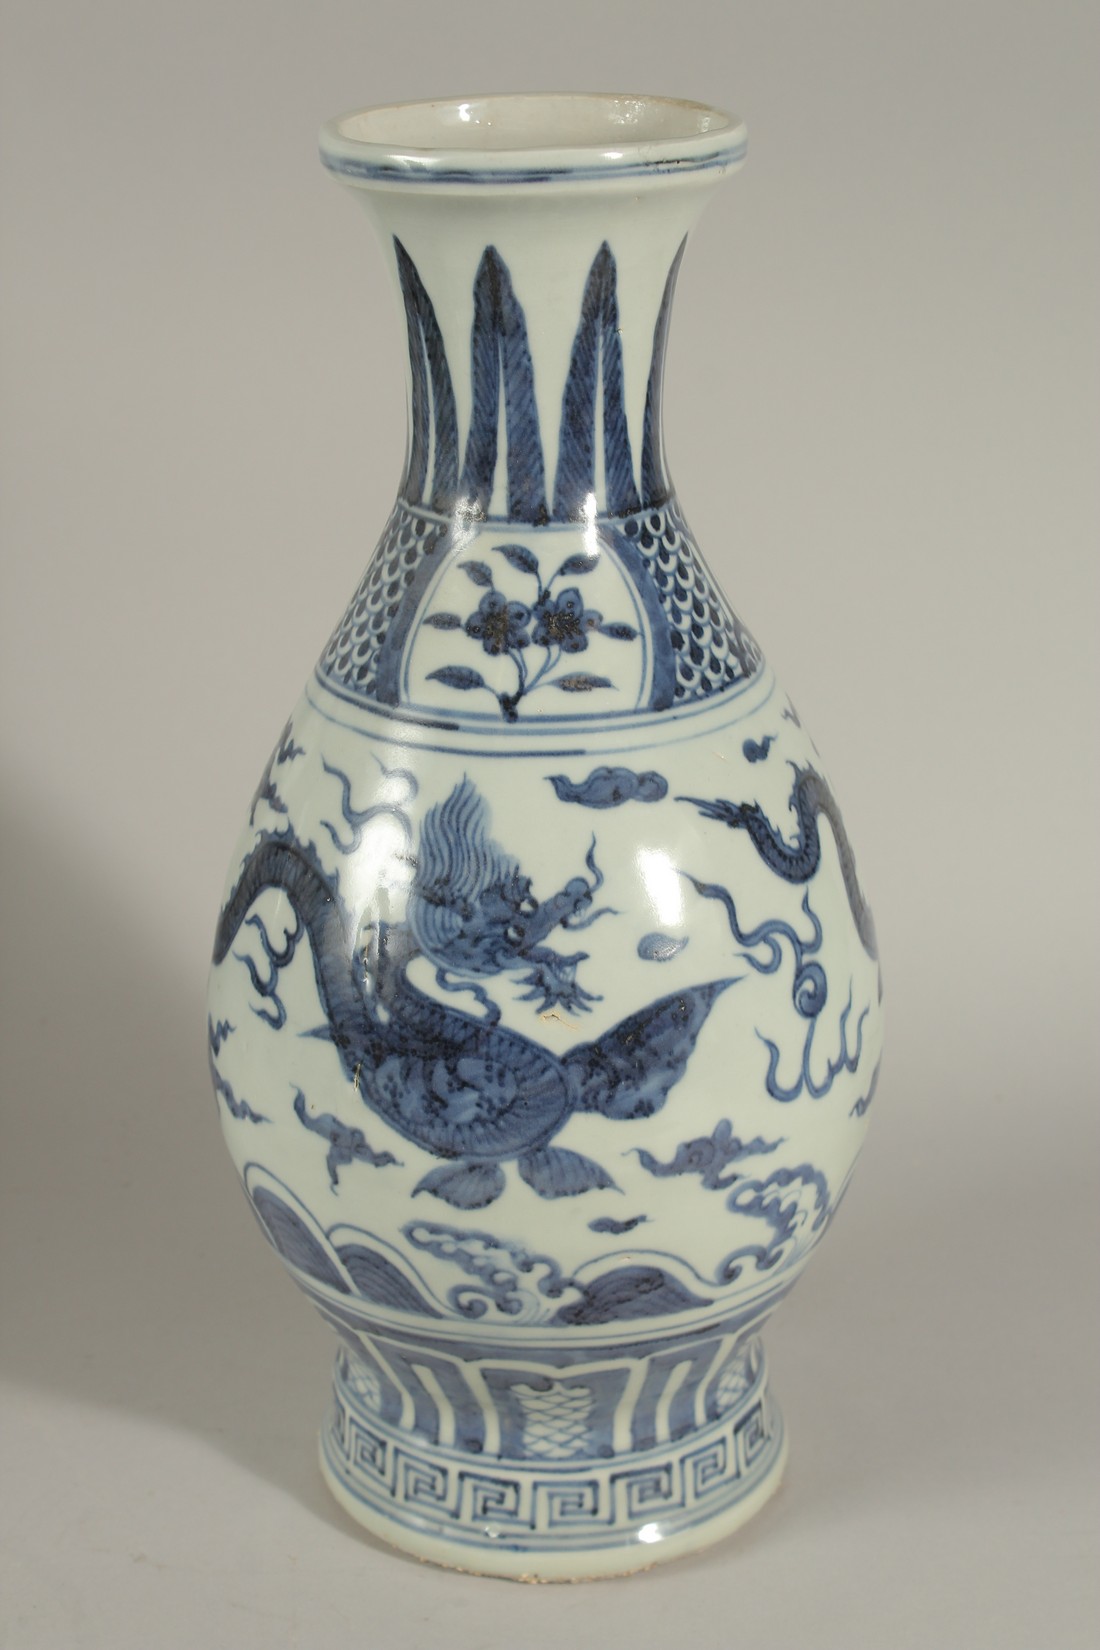 A CHINESE BLUE AND WHITE PORCELAIN DRAGON VASE, designed with two dragons chasing the flaming